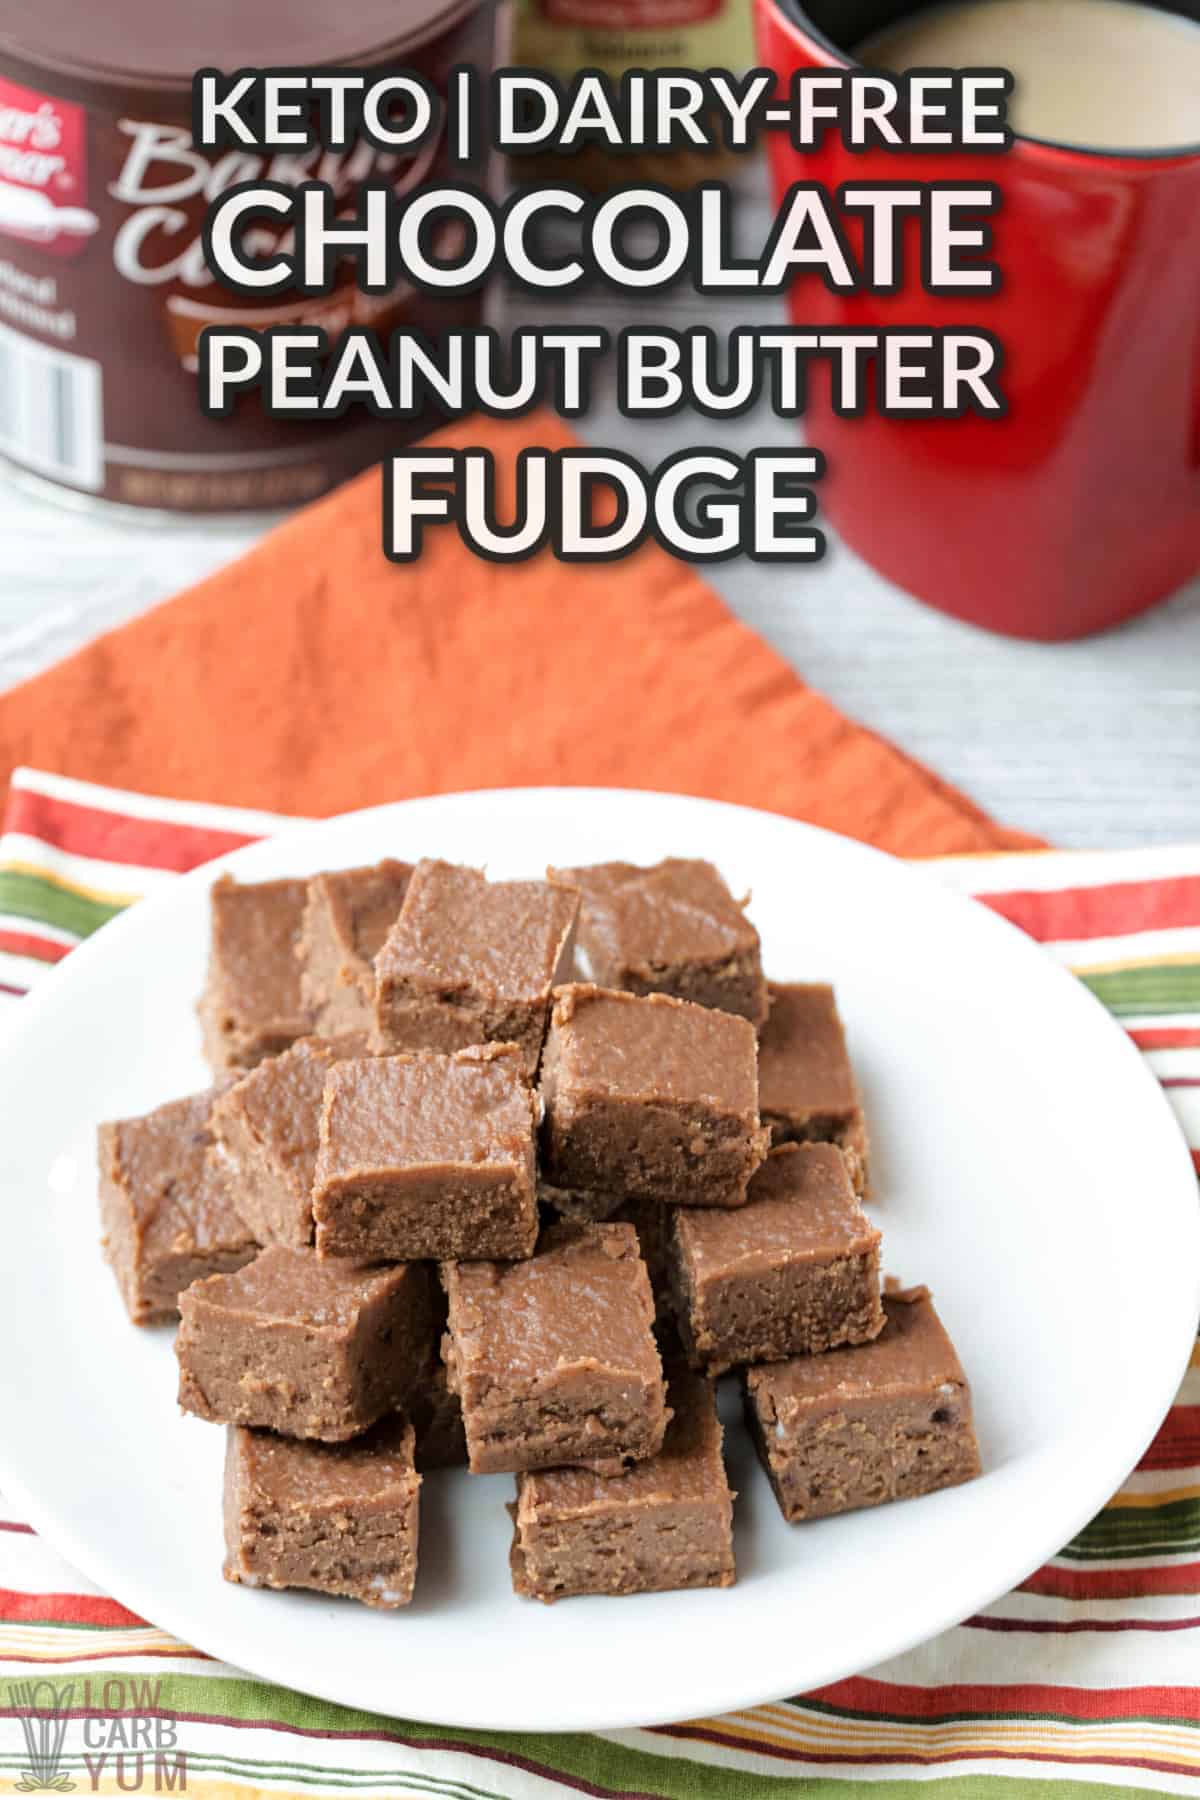 chocolate peanut butter fudge with text overlay.